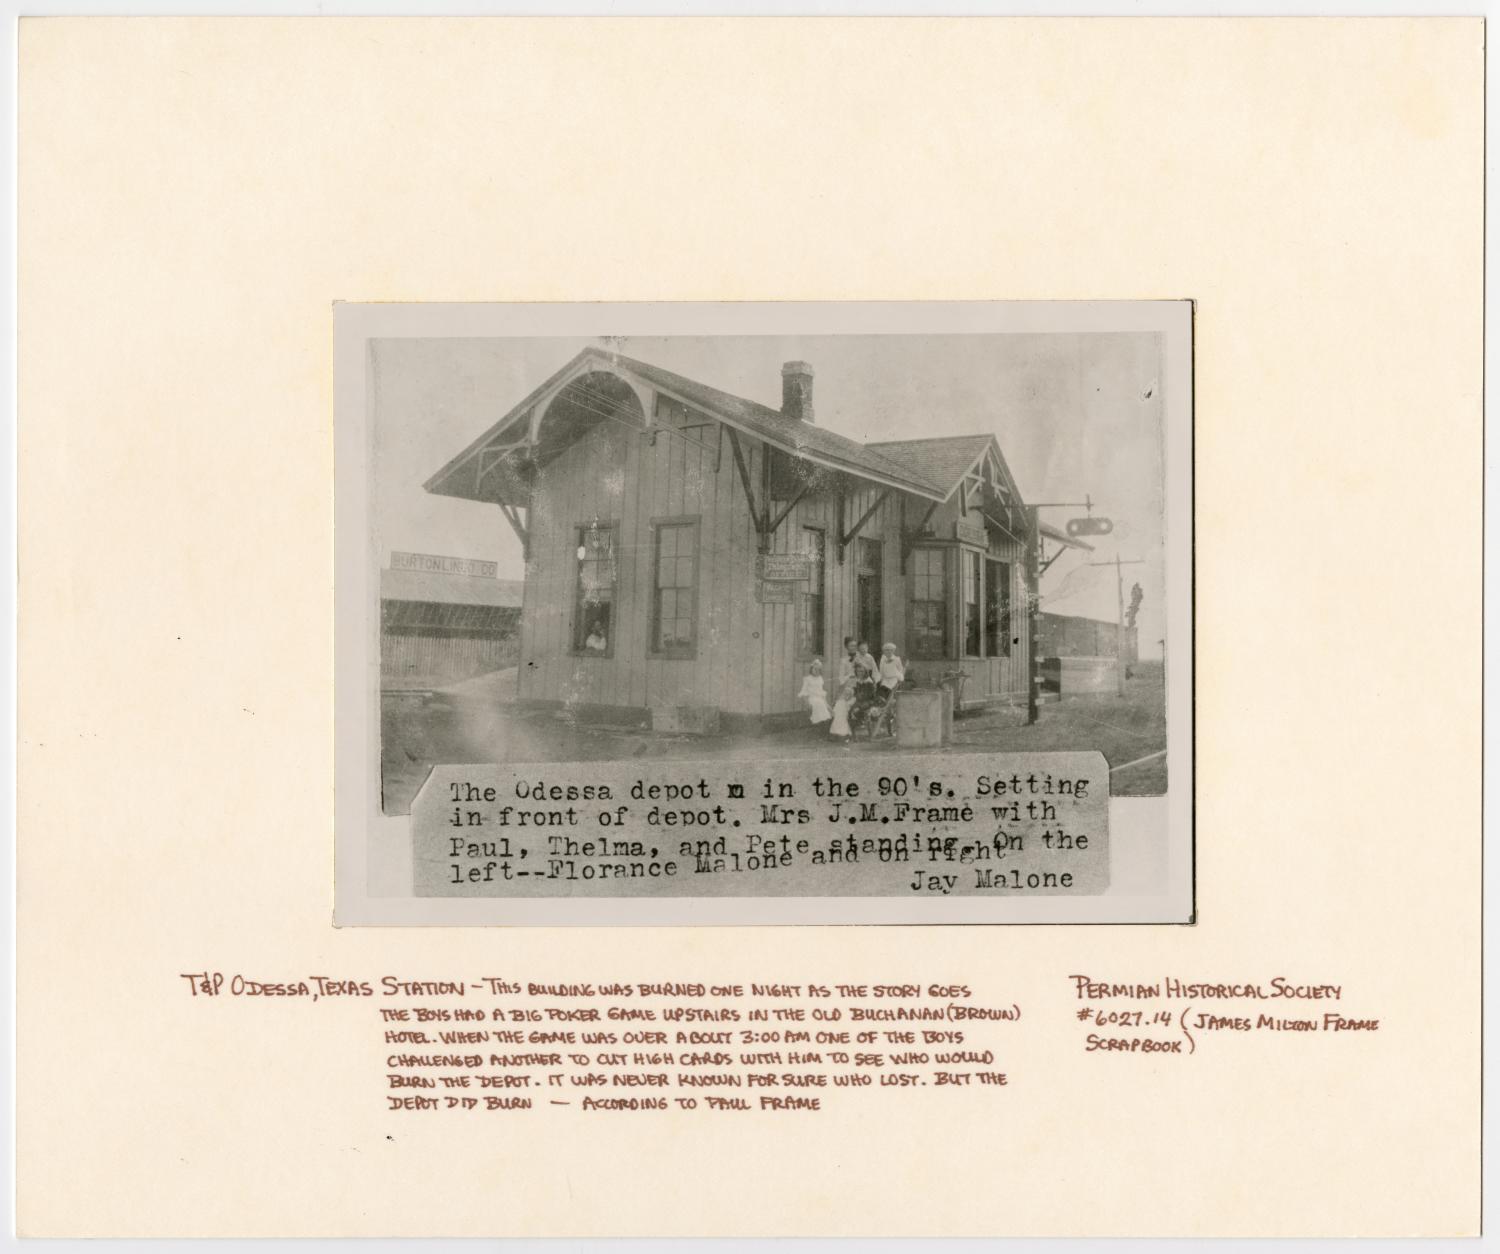 Images of Texas & Pacific Stations and Structures in  Odessa, TX